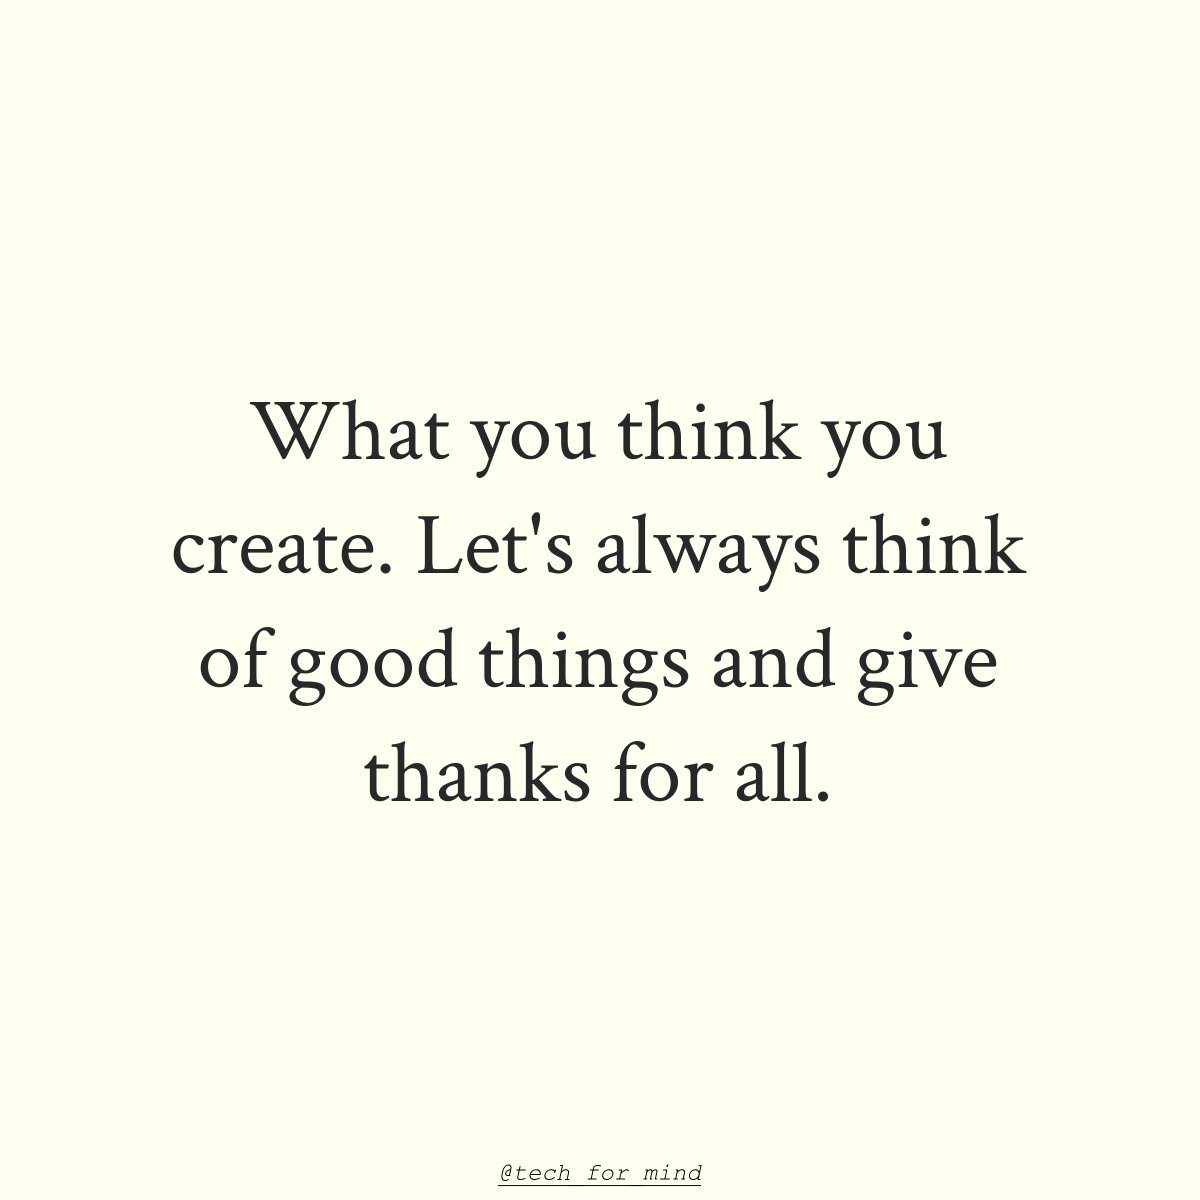 What positive thought are you thinking about?
#Gratitude #PositiveThinking #Thankful